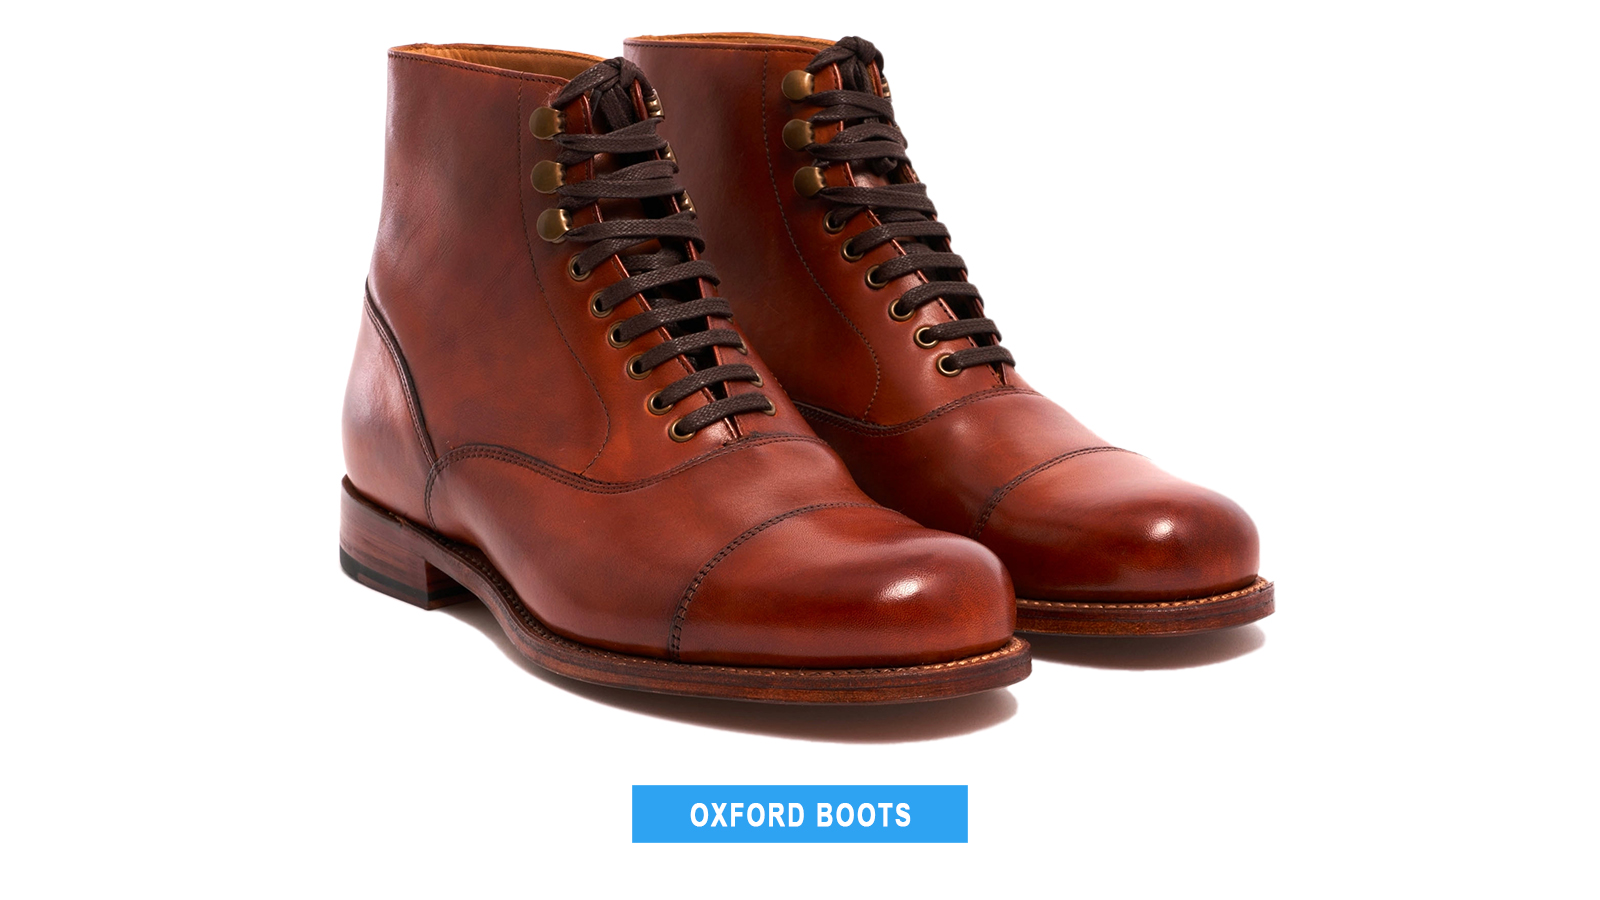 Oxford boots style for men